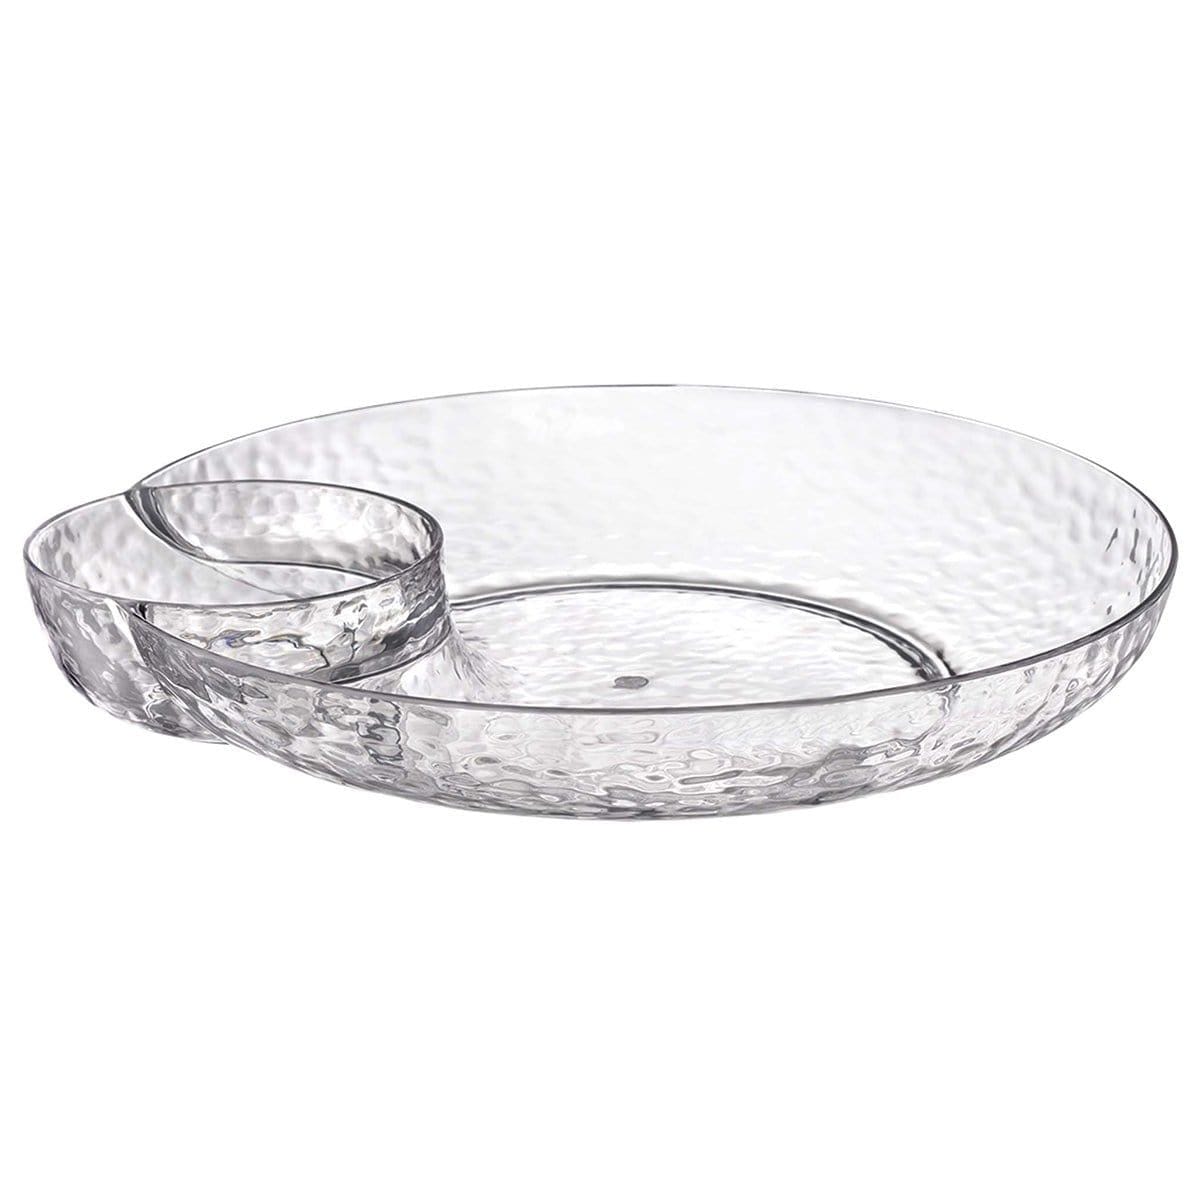 Buy Plasticware Chip & Dip Clear Bowl sold at Party Expert